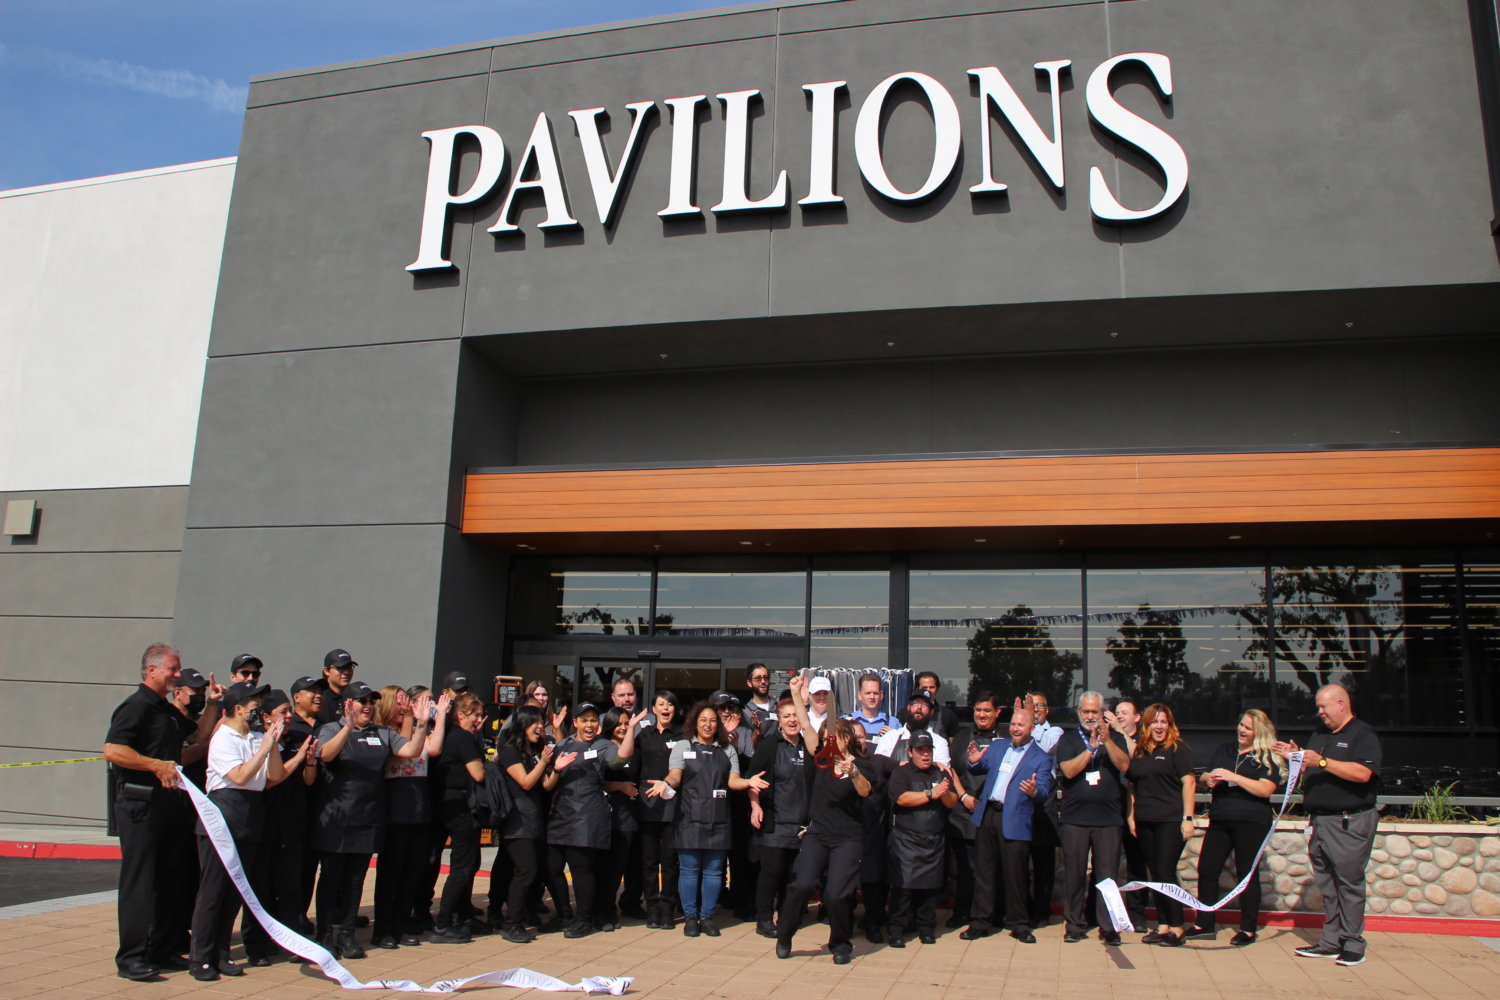 Grand 'Re-Opening' of the South Pasadena Pavilions grocery store after a major remodel three years in the making.